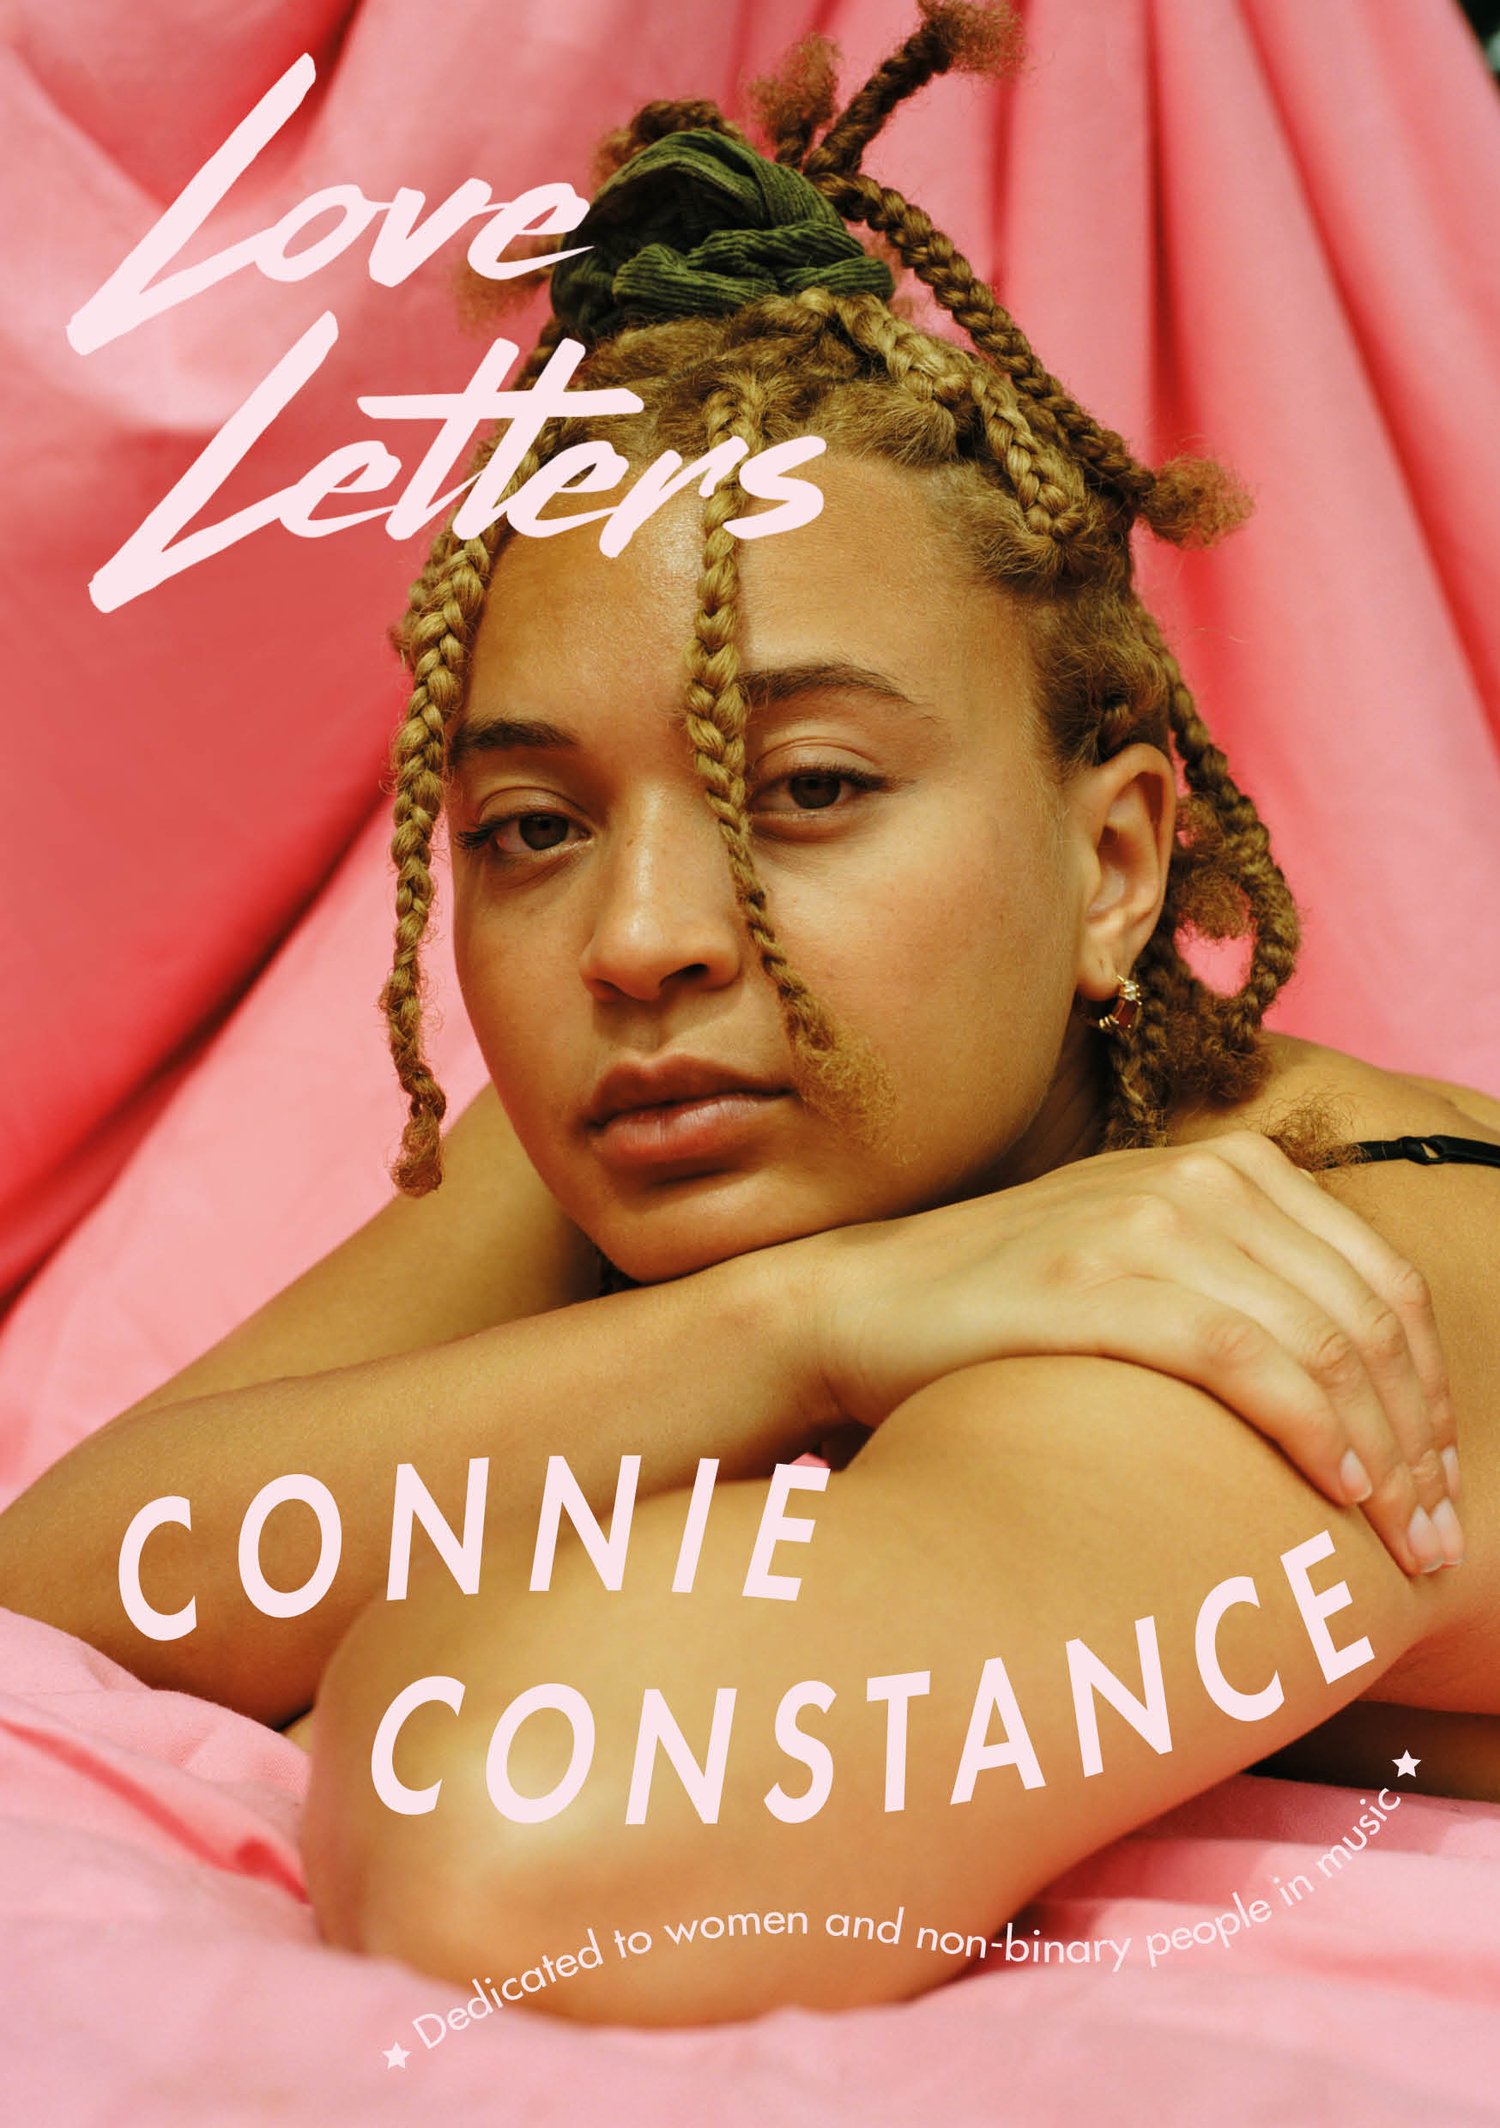 Love Letters Issue 3 - Connie Constance